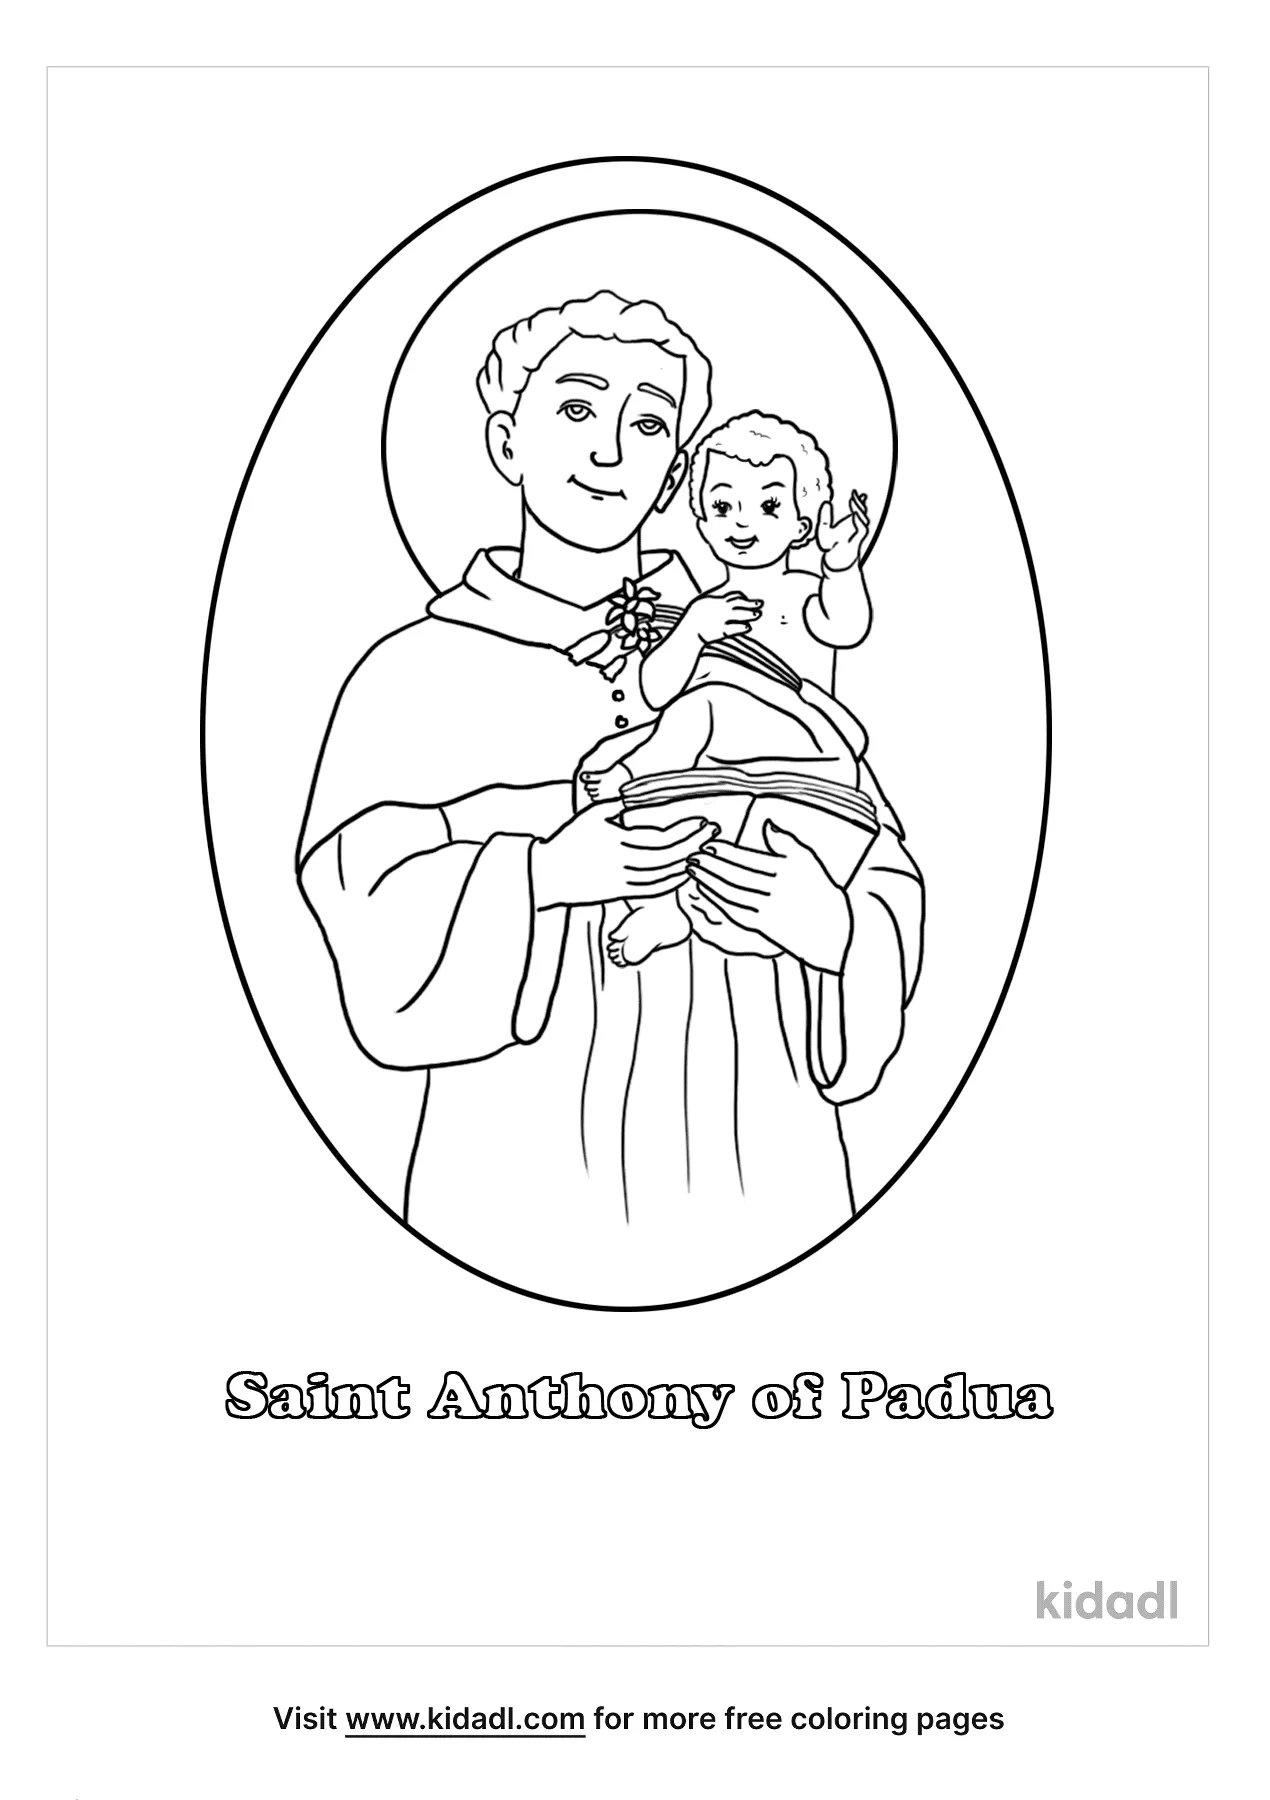 Free saint anthony of padua coloring page coloring page printables